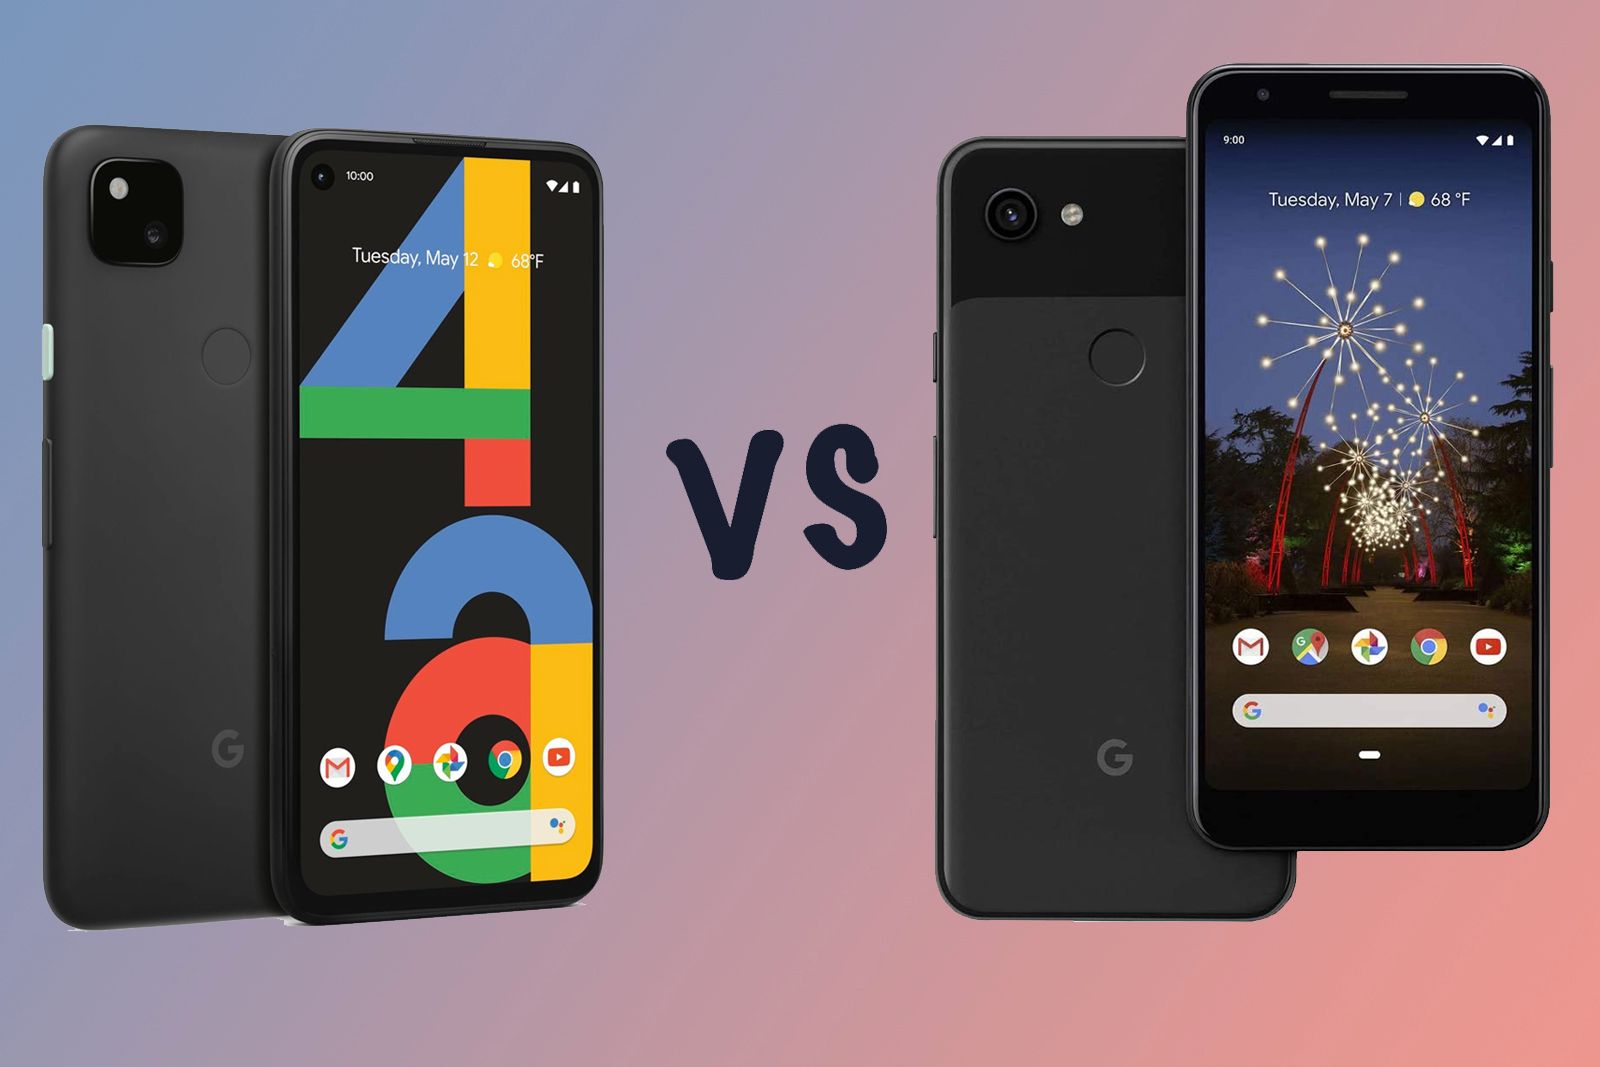 Google Pixel 4a vs Pixel 3a: What's the difference?